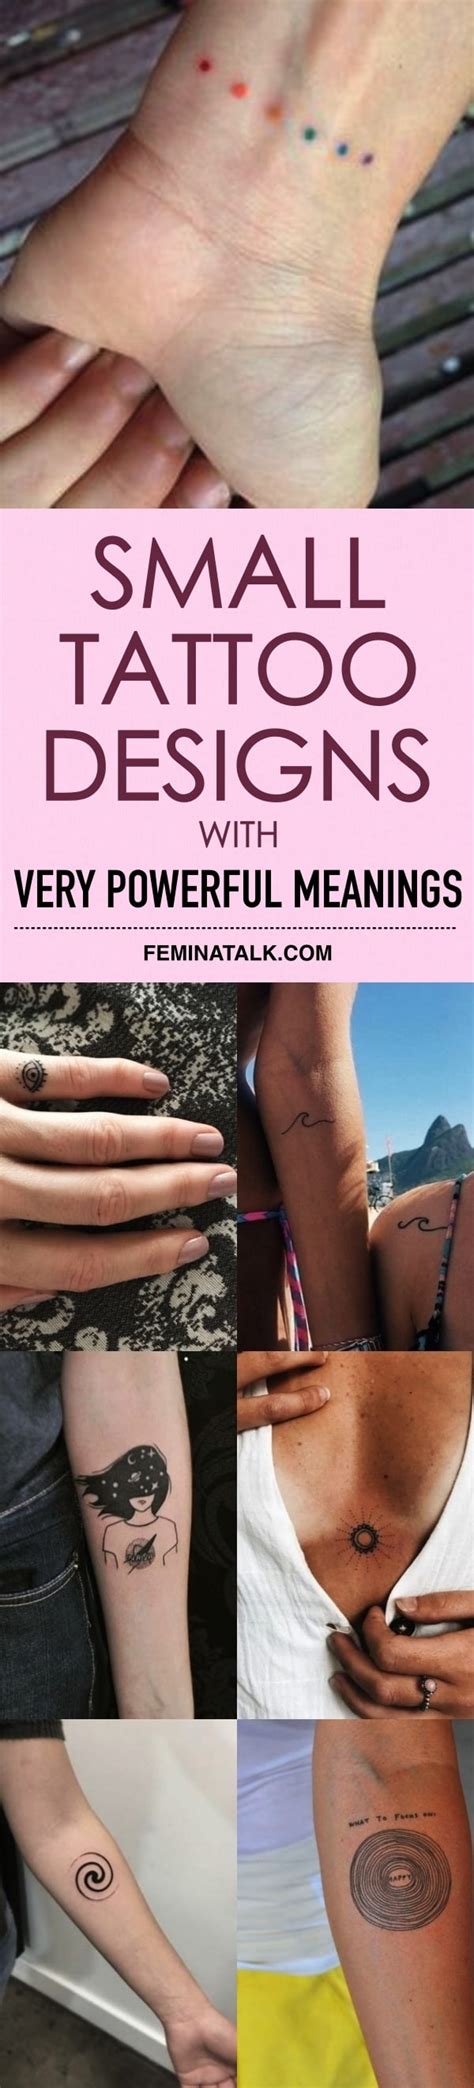 150 Powerful Small Tattoo Designs With Meaning – Feminatalk